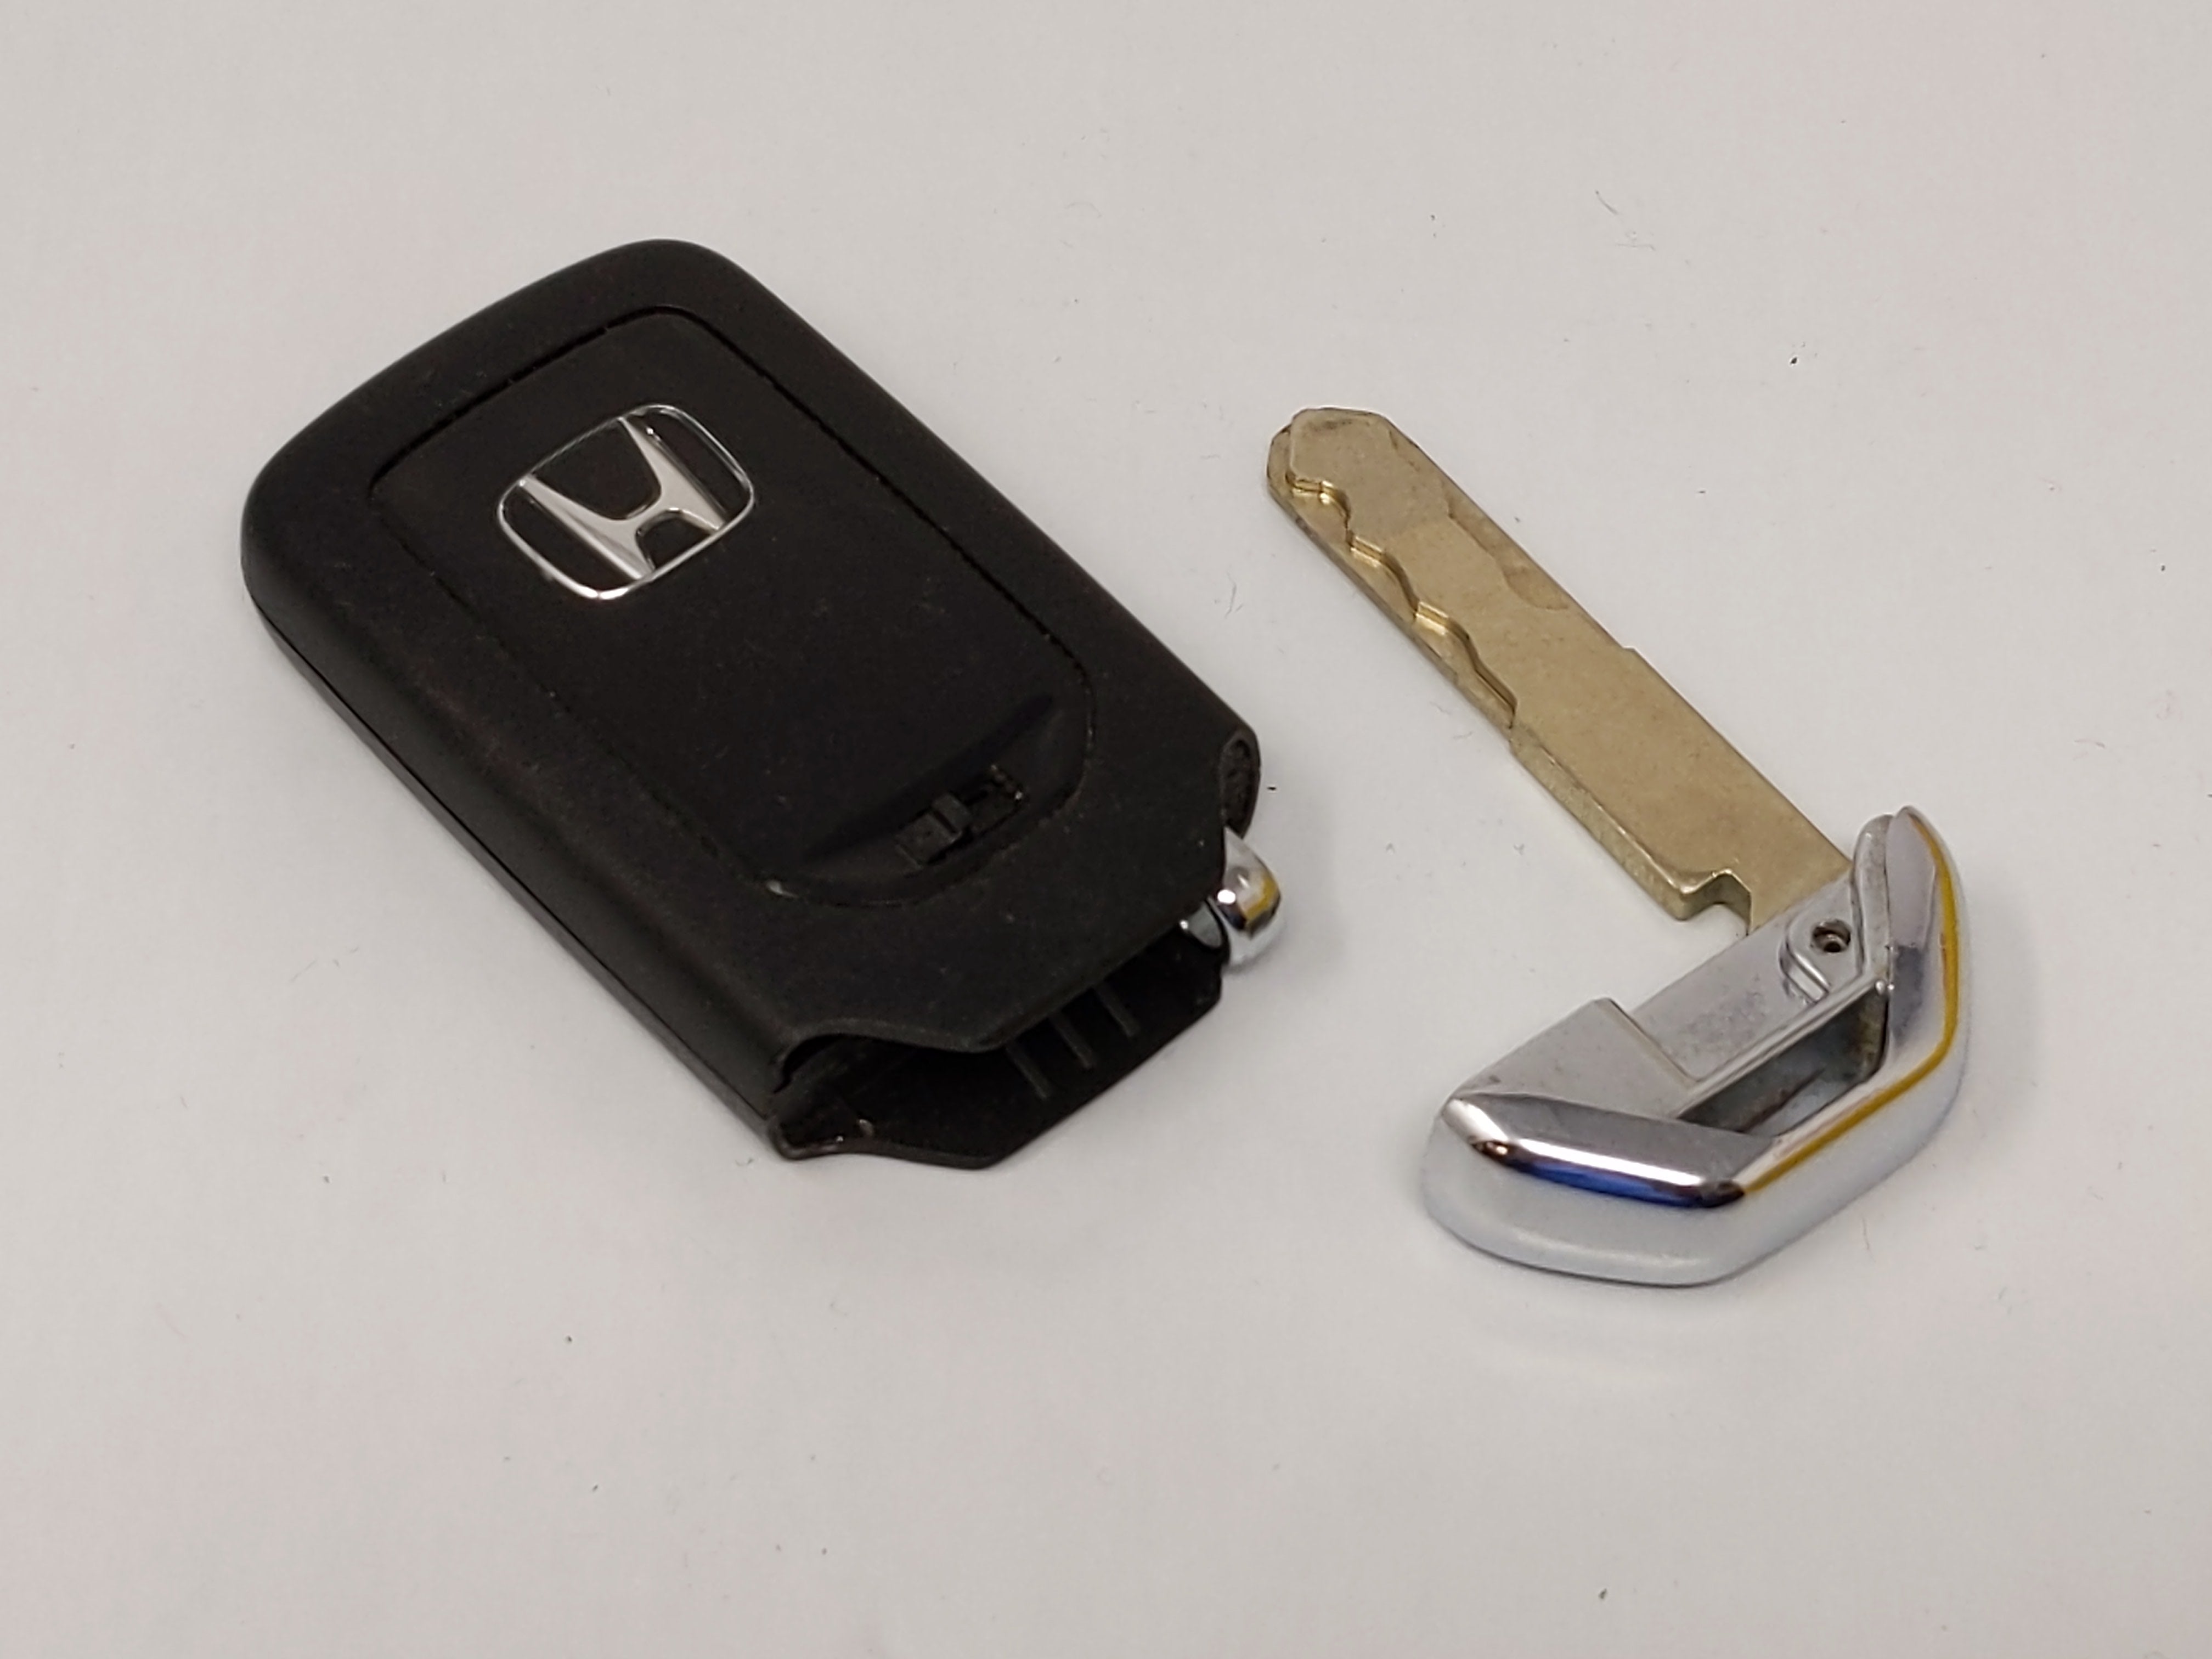 Honda Fit Keyless Entry Remote Fob KR5V1X A2C83161800 72147-T7S-A01 4 buttons - Oemusedautoparts1.com